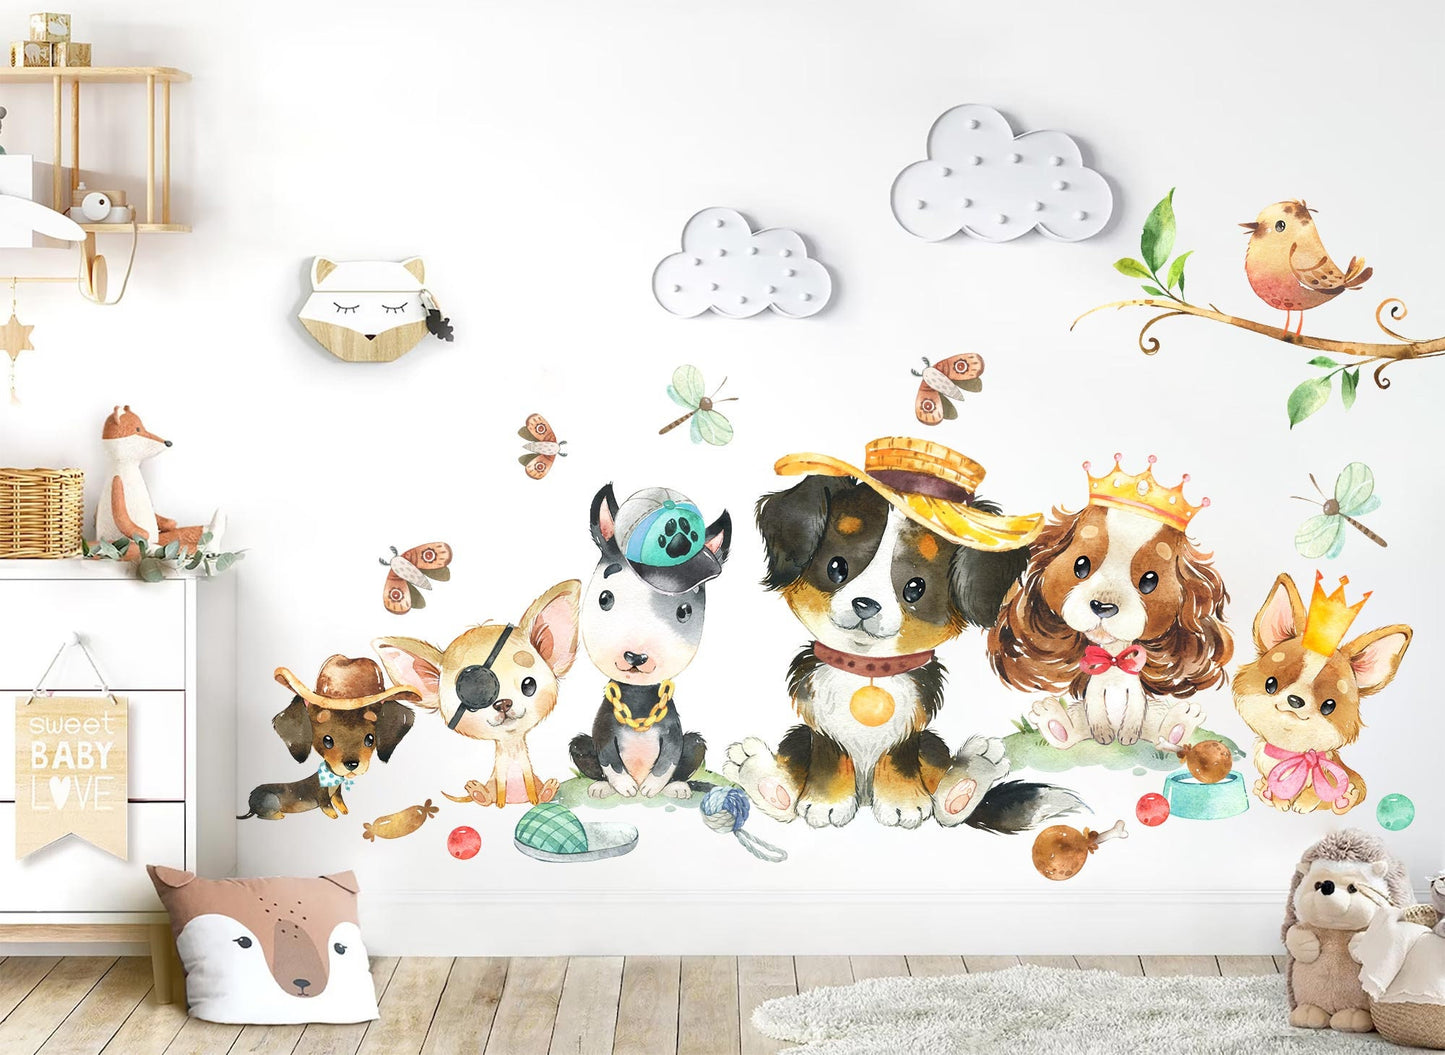 Adorable Watercolor Puppy Wall Decal - Cute Puppies Sitting on Grass - Perfect for Kids Room Decor - BR326